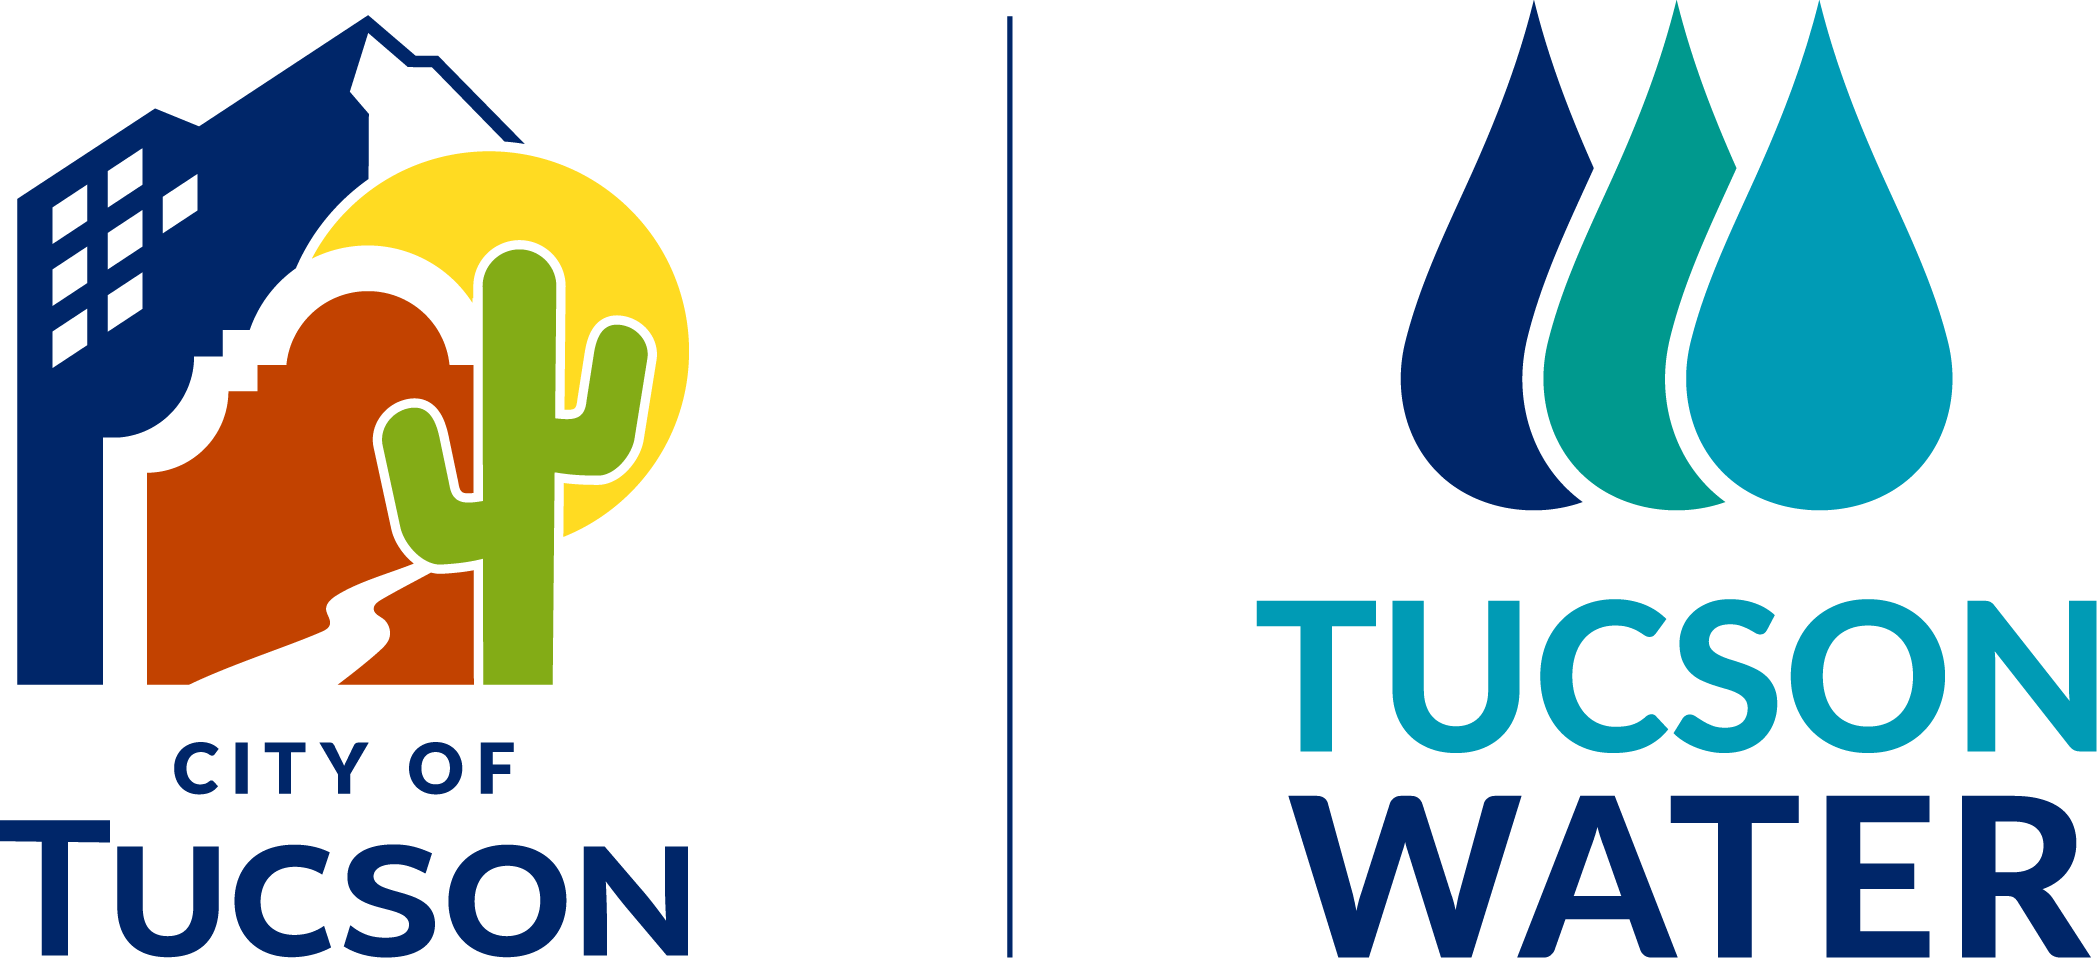 city of tucson and tucson water logo